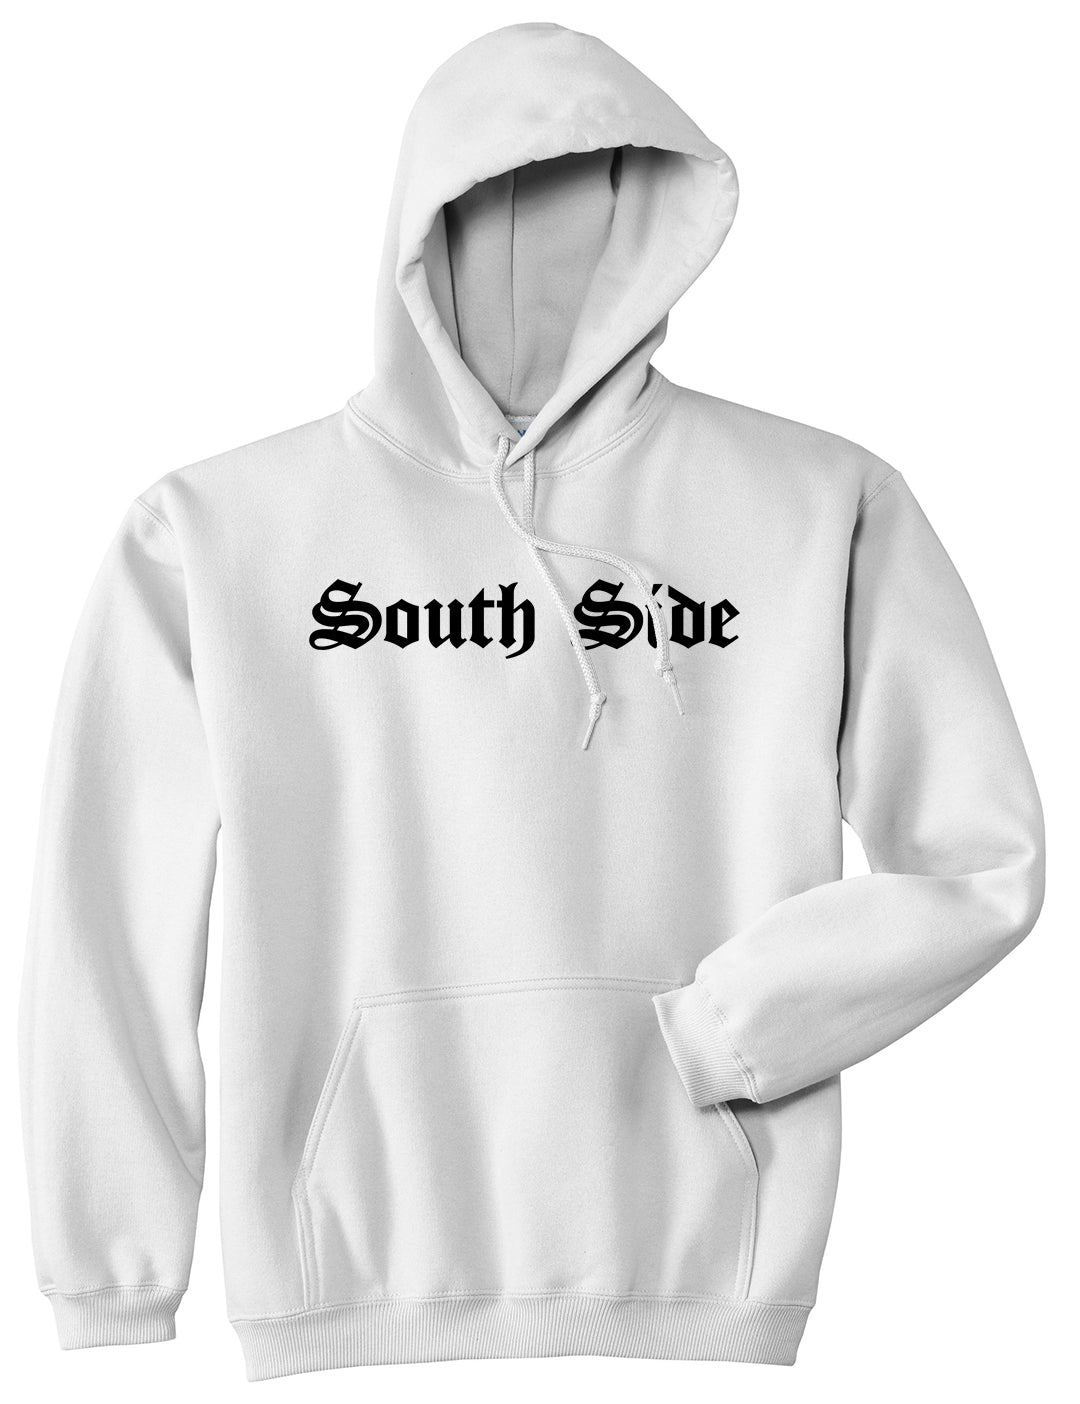 South Side Old English Mens Pullover Hoodie White